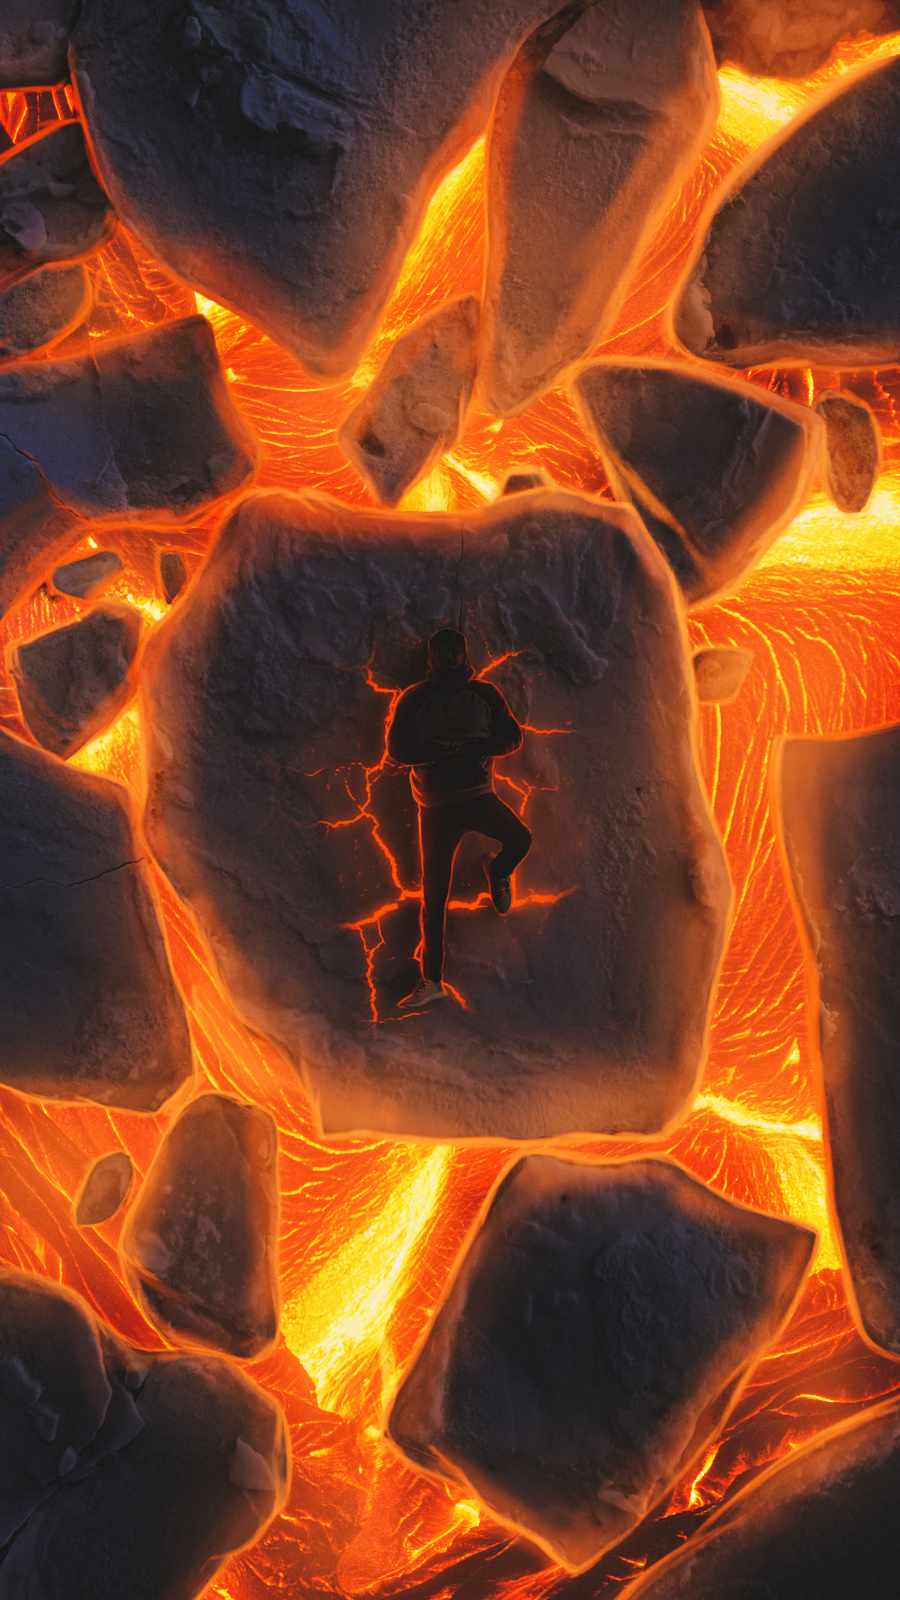 Lava Guy IPhone Wallpaper - IPhone Wallpapers : iPhone Wallpapers